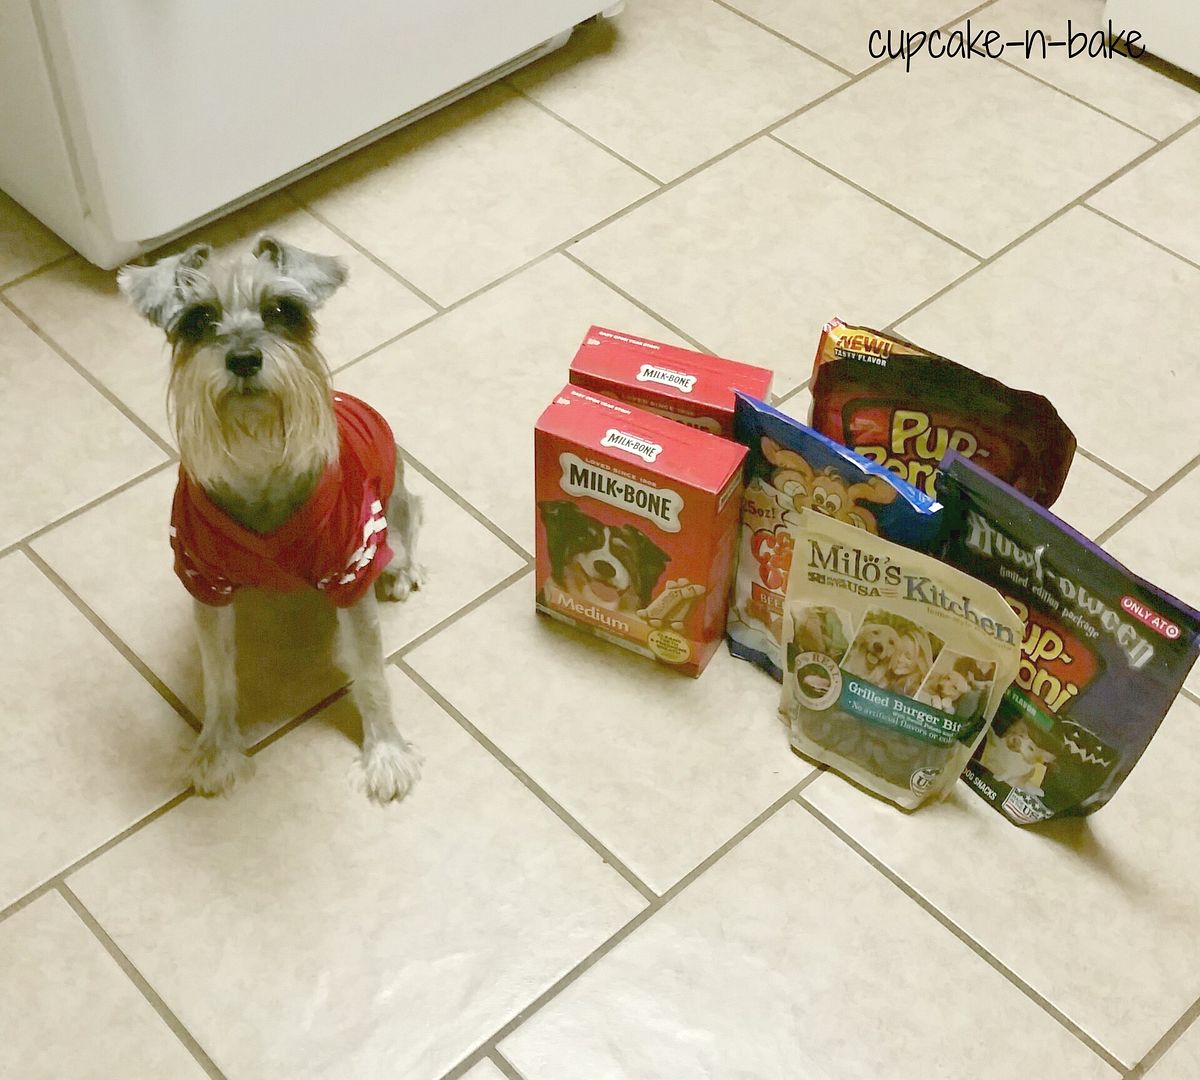  Trick or Treat with your pup this Howl-o-ween. @cupcake_n_bake @milkbone